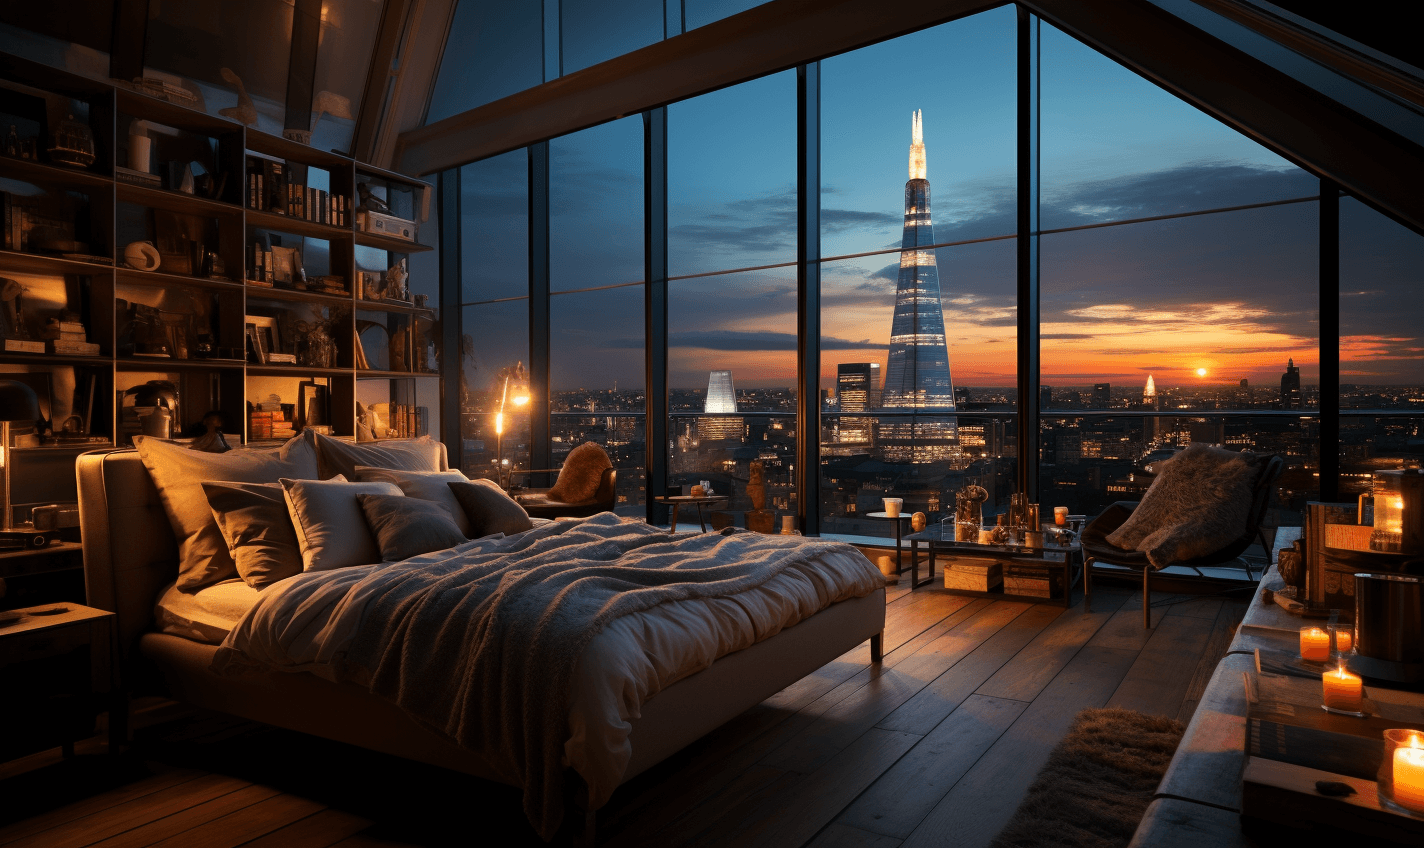 Modern loft in night setting with a view to Shard